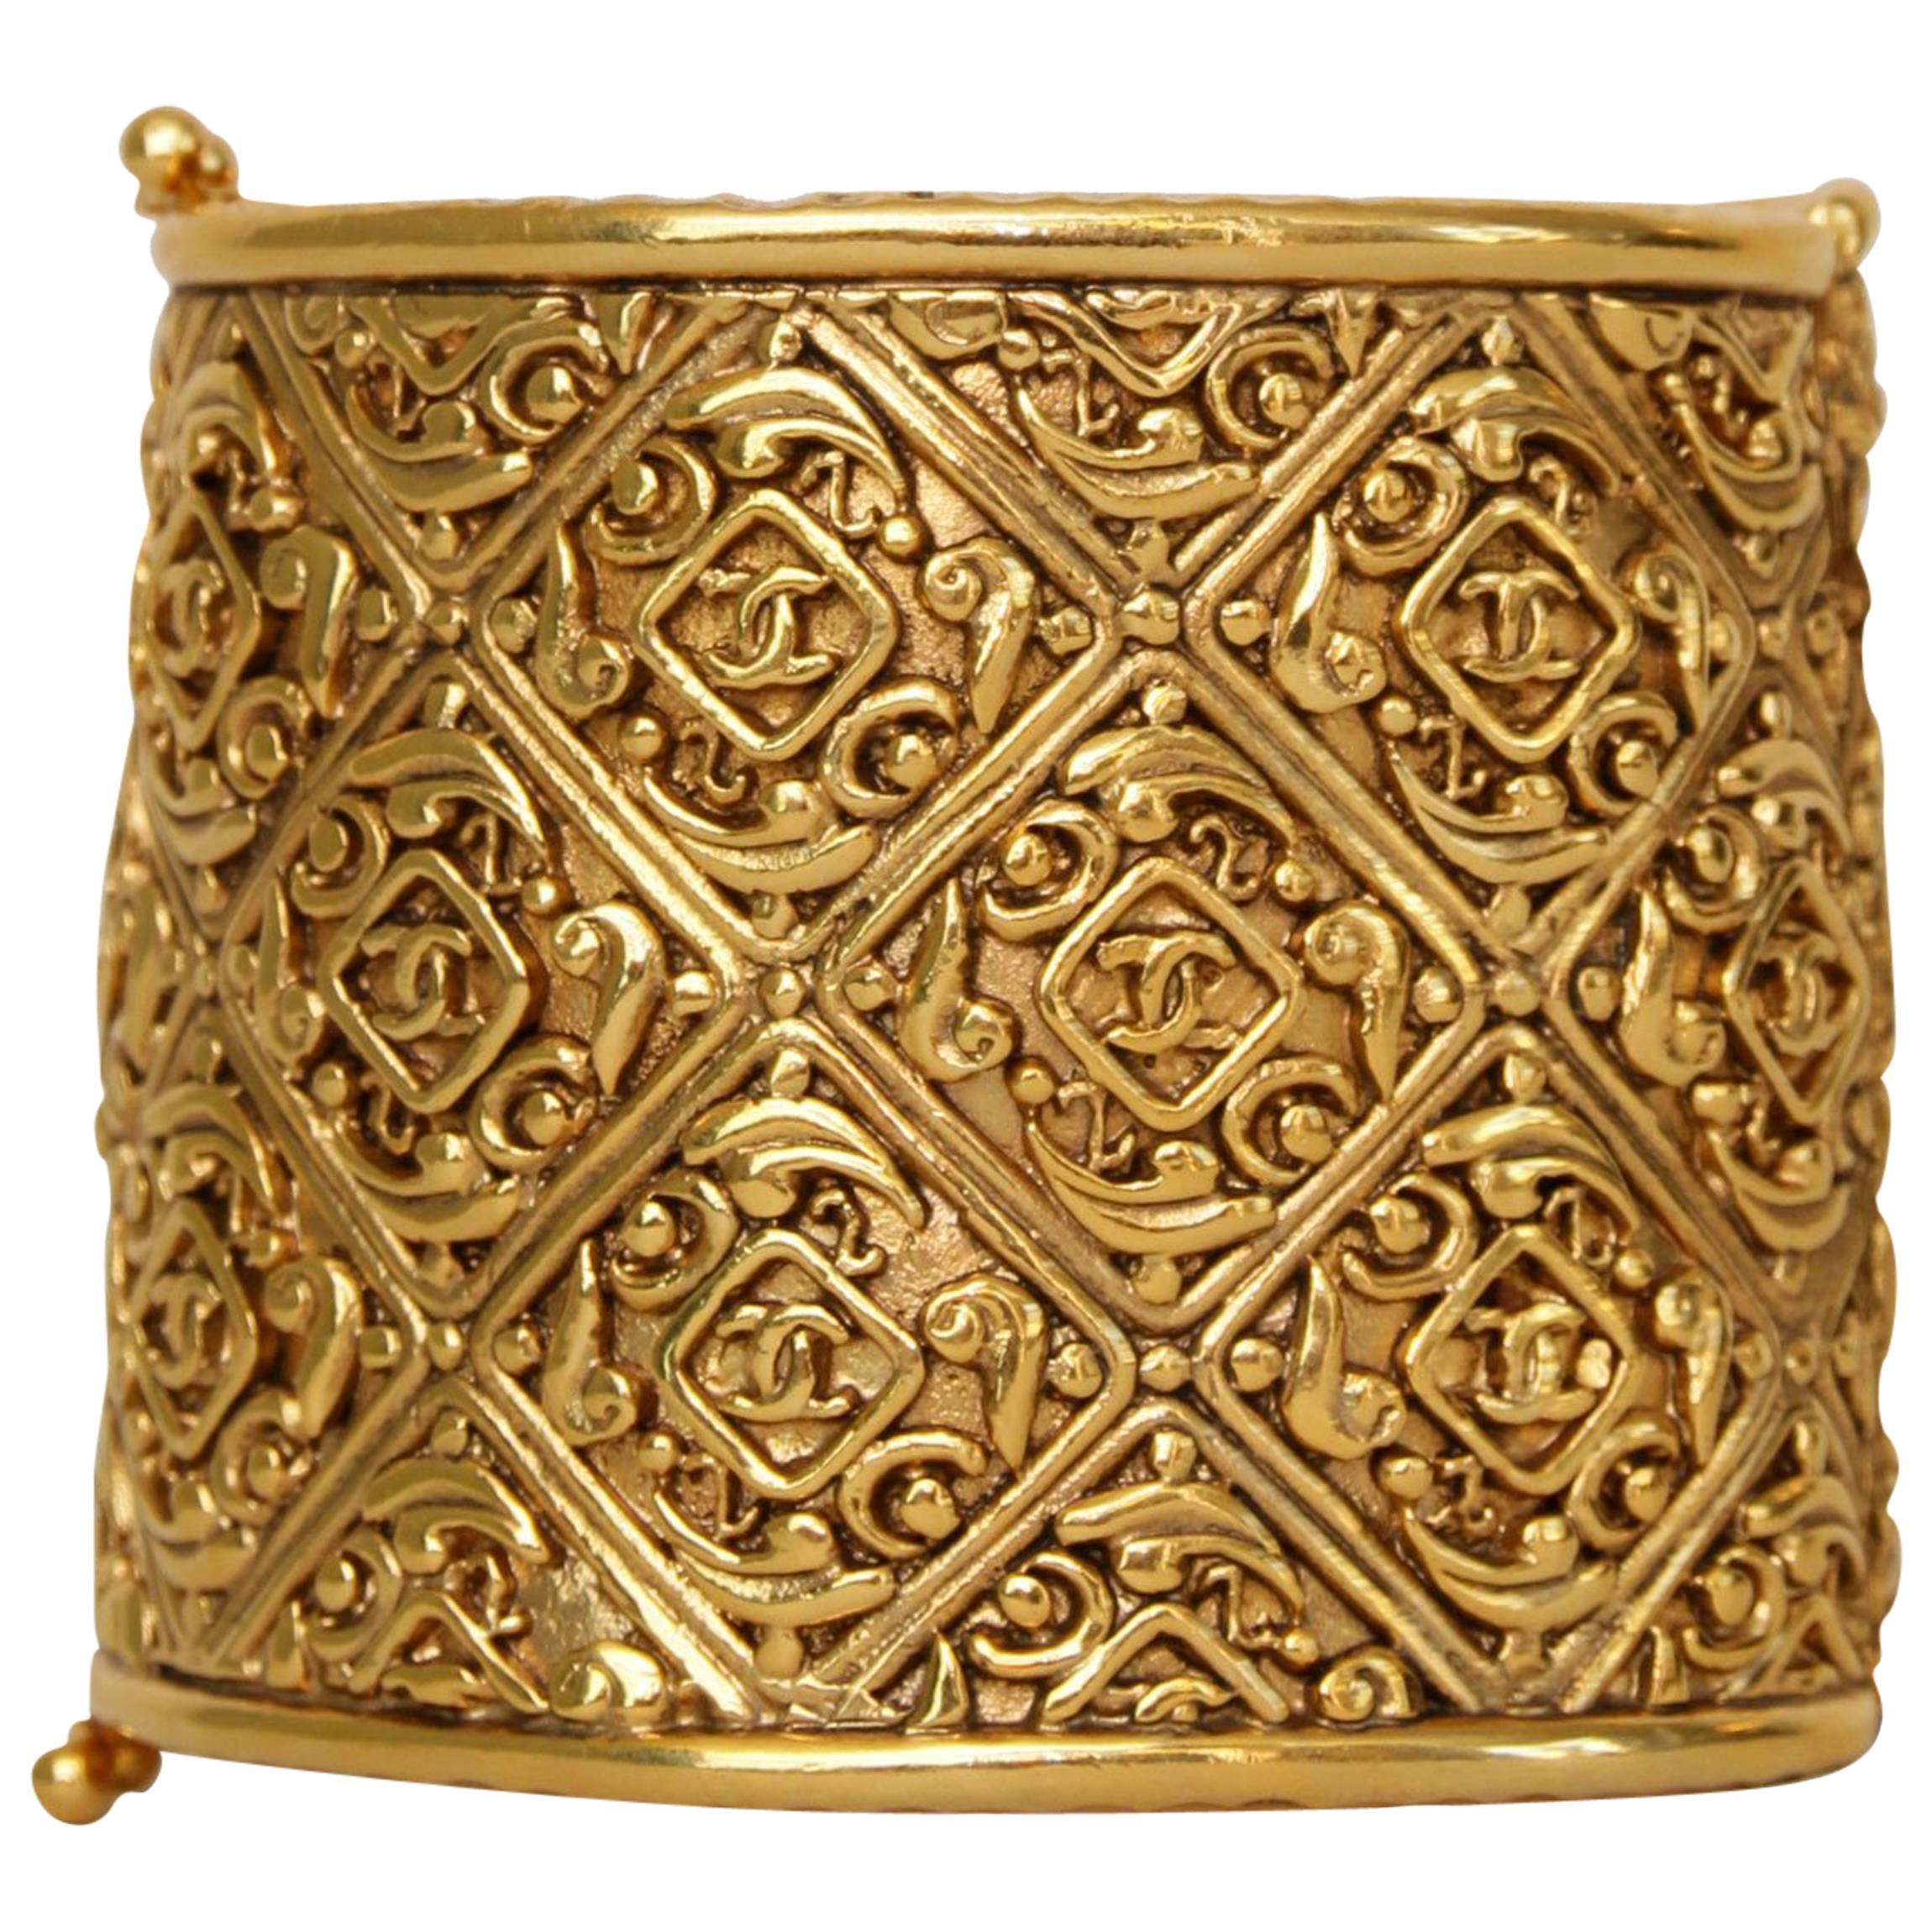 An Engraved 1980s Gold-toned Chanel Cuff Bracelet